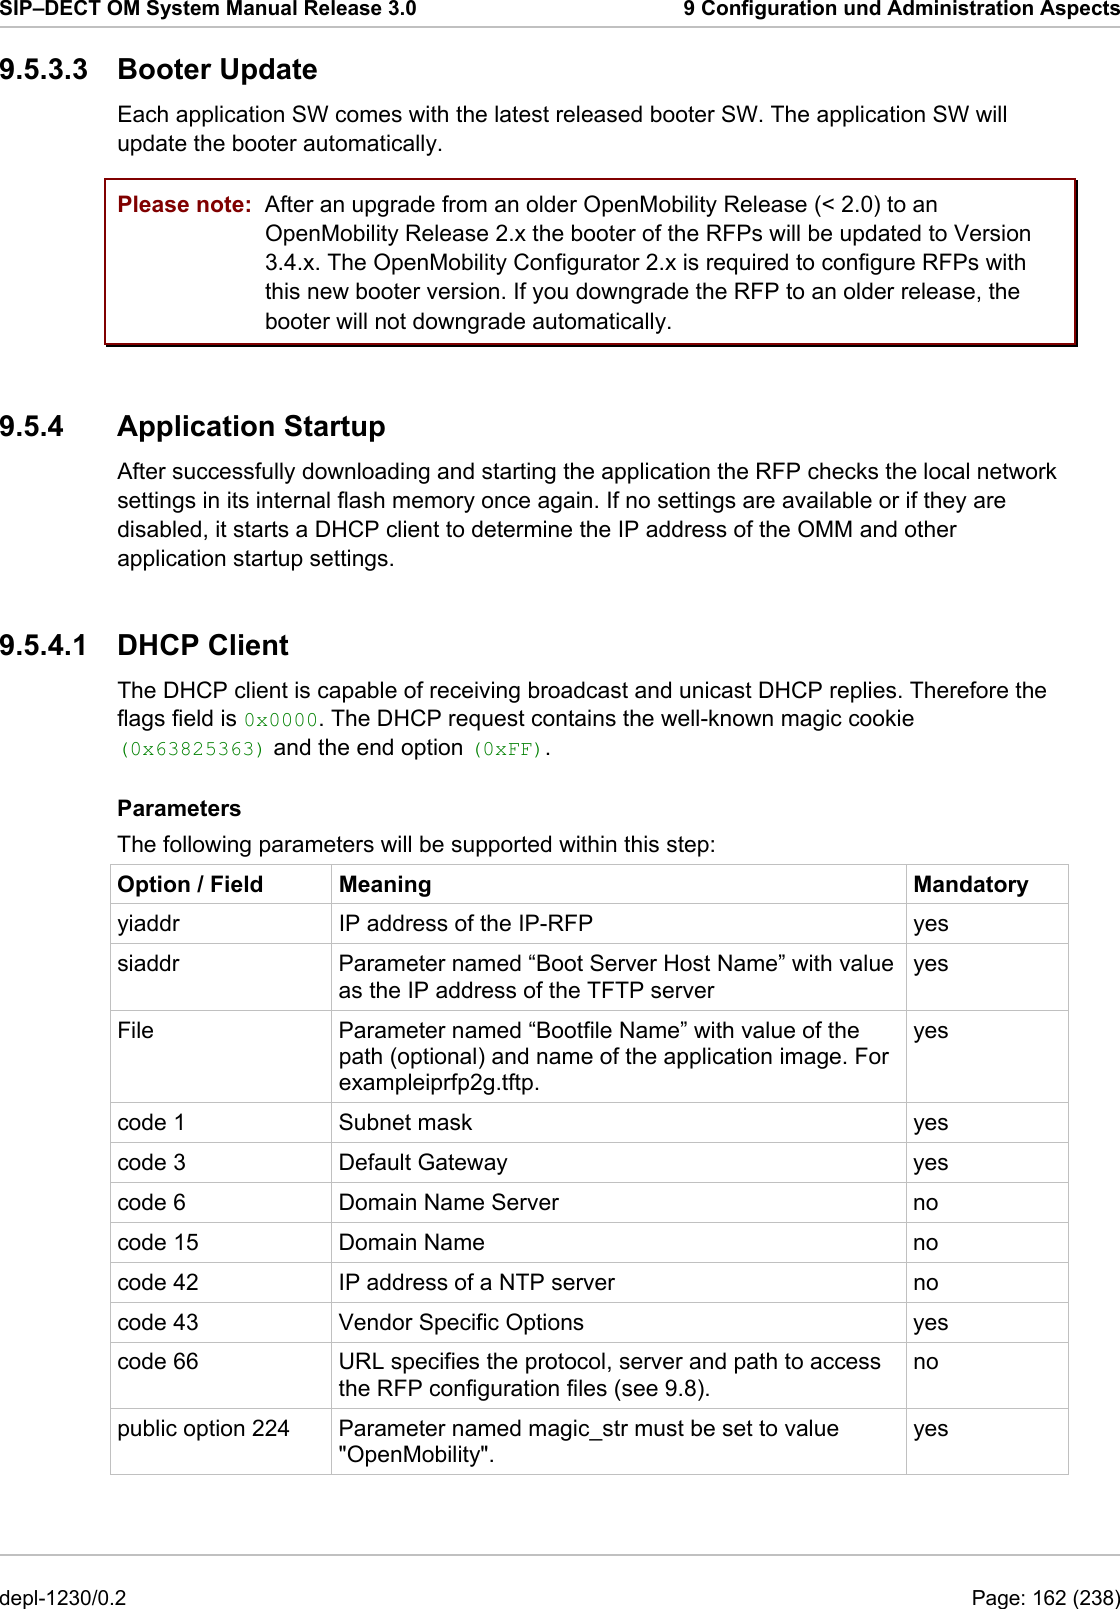 SIP–DECT OM System Manual Release 3.0  9 Configuration und Administration Aspects 9.5.3.3 Booter Update Each application SW comes with the latest released booter SW. The application SW will update the booter automatically.  Please note:  After an upgrade from an older OpenMobility Release (&lt; 2.0) to an OpenMobility Release 2.x the booter of the RFPs will be updated to Version 3.4.x. The OpenMobility Configurator 2.x is required to configure RFPs with this new booter version. If you downgrade the RFP to an older release, the booter will not downgrade automatically. 9.5.4 Application Startup After successfully downloading and starting the application the RFP checks the local network settings in its internal flash memory once again. If no settings are available or if they are disabled, it starts a DHCP client to determine the IP address of the OMM and other application startup settings. 9.5.4.1 DHCP Client The DHCP client is capable of receiving broadcast and unicast DHCP replies. Therefore the flags field is 0x0000. The DHCP request contains the well-known magic cookie (0x63825363) and the end option (0xFF). Parameters The following parameters will be supported within this step: Option / Field  Meaning  Mandatory yiaddr  IP address of the IP-RFP  yes siaddr  Parameter named “Boot Server Host Name” with value as the IP address of the TFTP server yes File  Parameter named “Bootfile Name” with value of the path (optional) and name of the application image. For exampleiprfp2g.tftp. yes code 1  Subnet mask  yes code 3  Default Gateway  yes code 6  Domain Name Server  no code 15  Domain Name  no code 42  IP address of a NTP server  no code 43  Vendor Specific Options  yes code 66  URL specifies the protocol, server and path to access the RFP configuration files (see 9.8). no public option 224  Parameter named magic_str must be set to value &quot;OpenMobility&quot;. yes depl-1230/0.2  Page: 162 (238) 